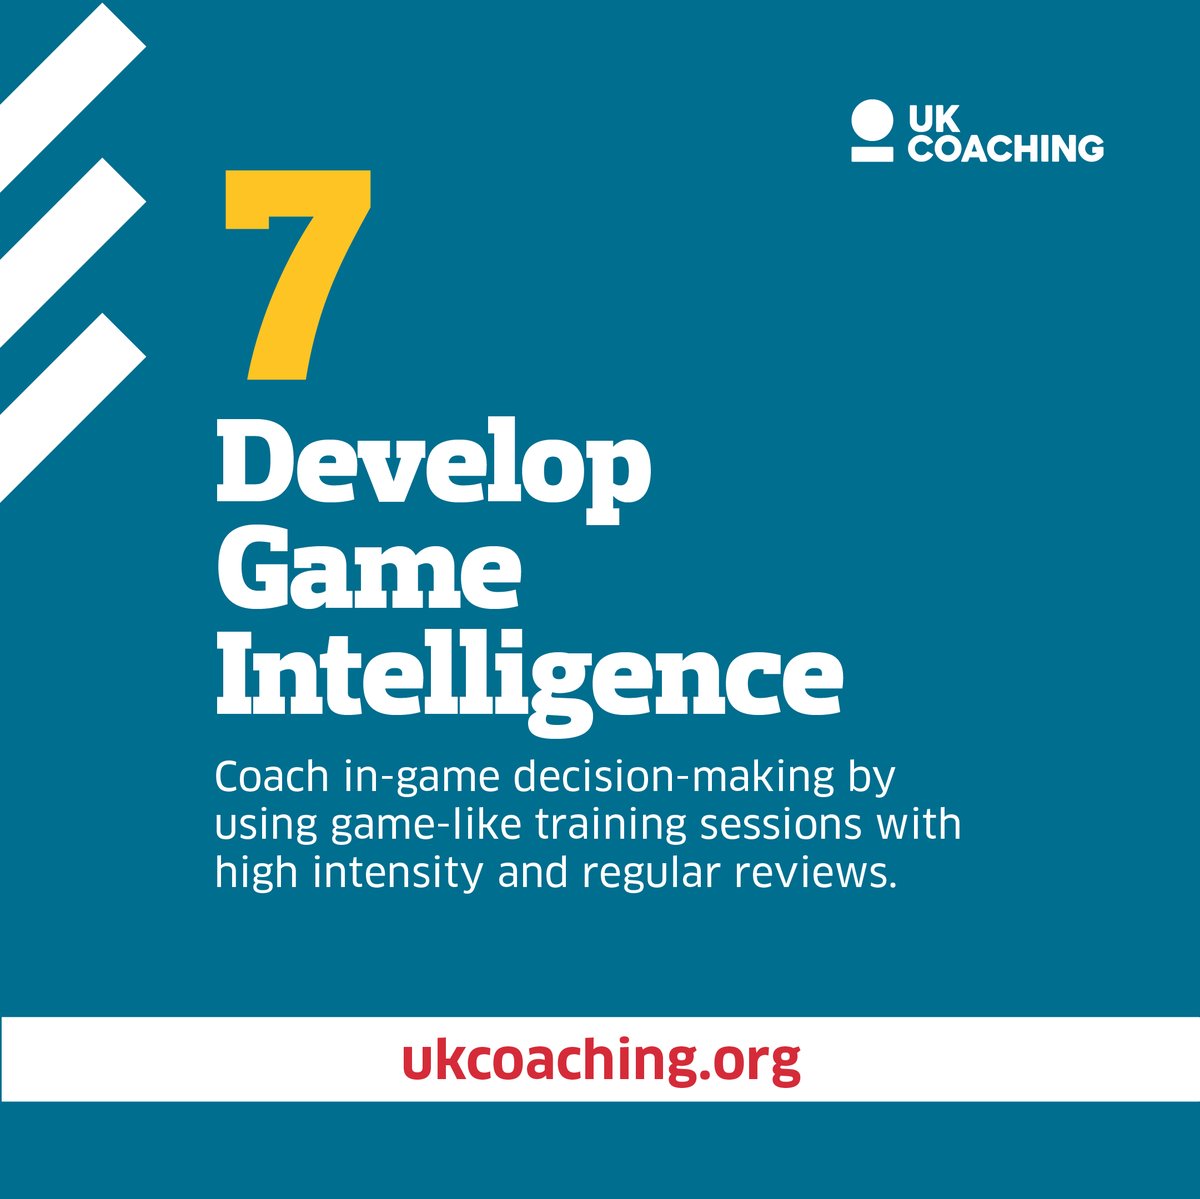 7️⃣ 'Develop Game Intelligence' – Decision-making is vital, and enhancing your players' ability to think for themselves under pressure is a skill that will benefit them in sport and in their everyday life @horsesheed (8/8)